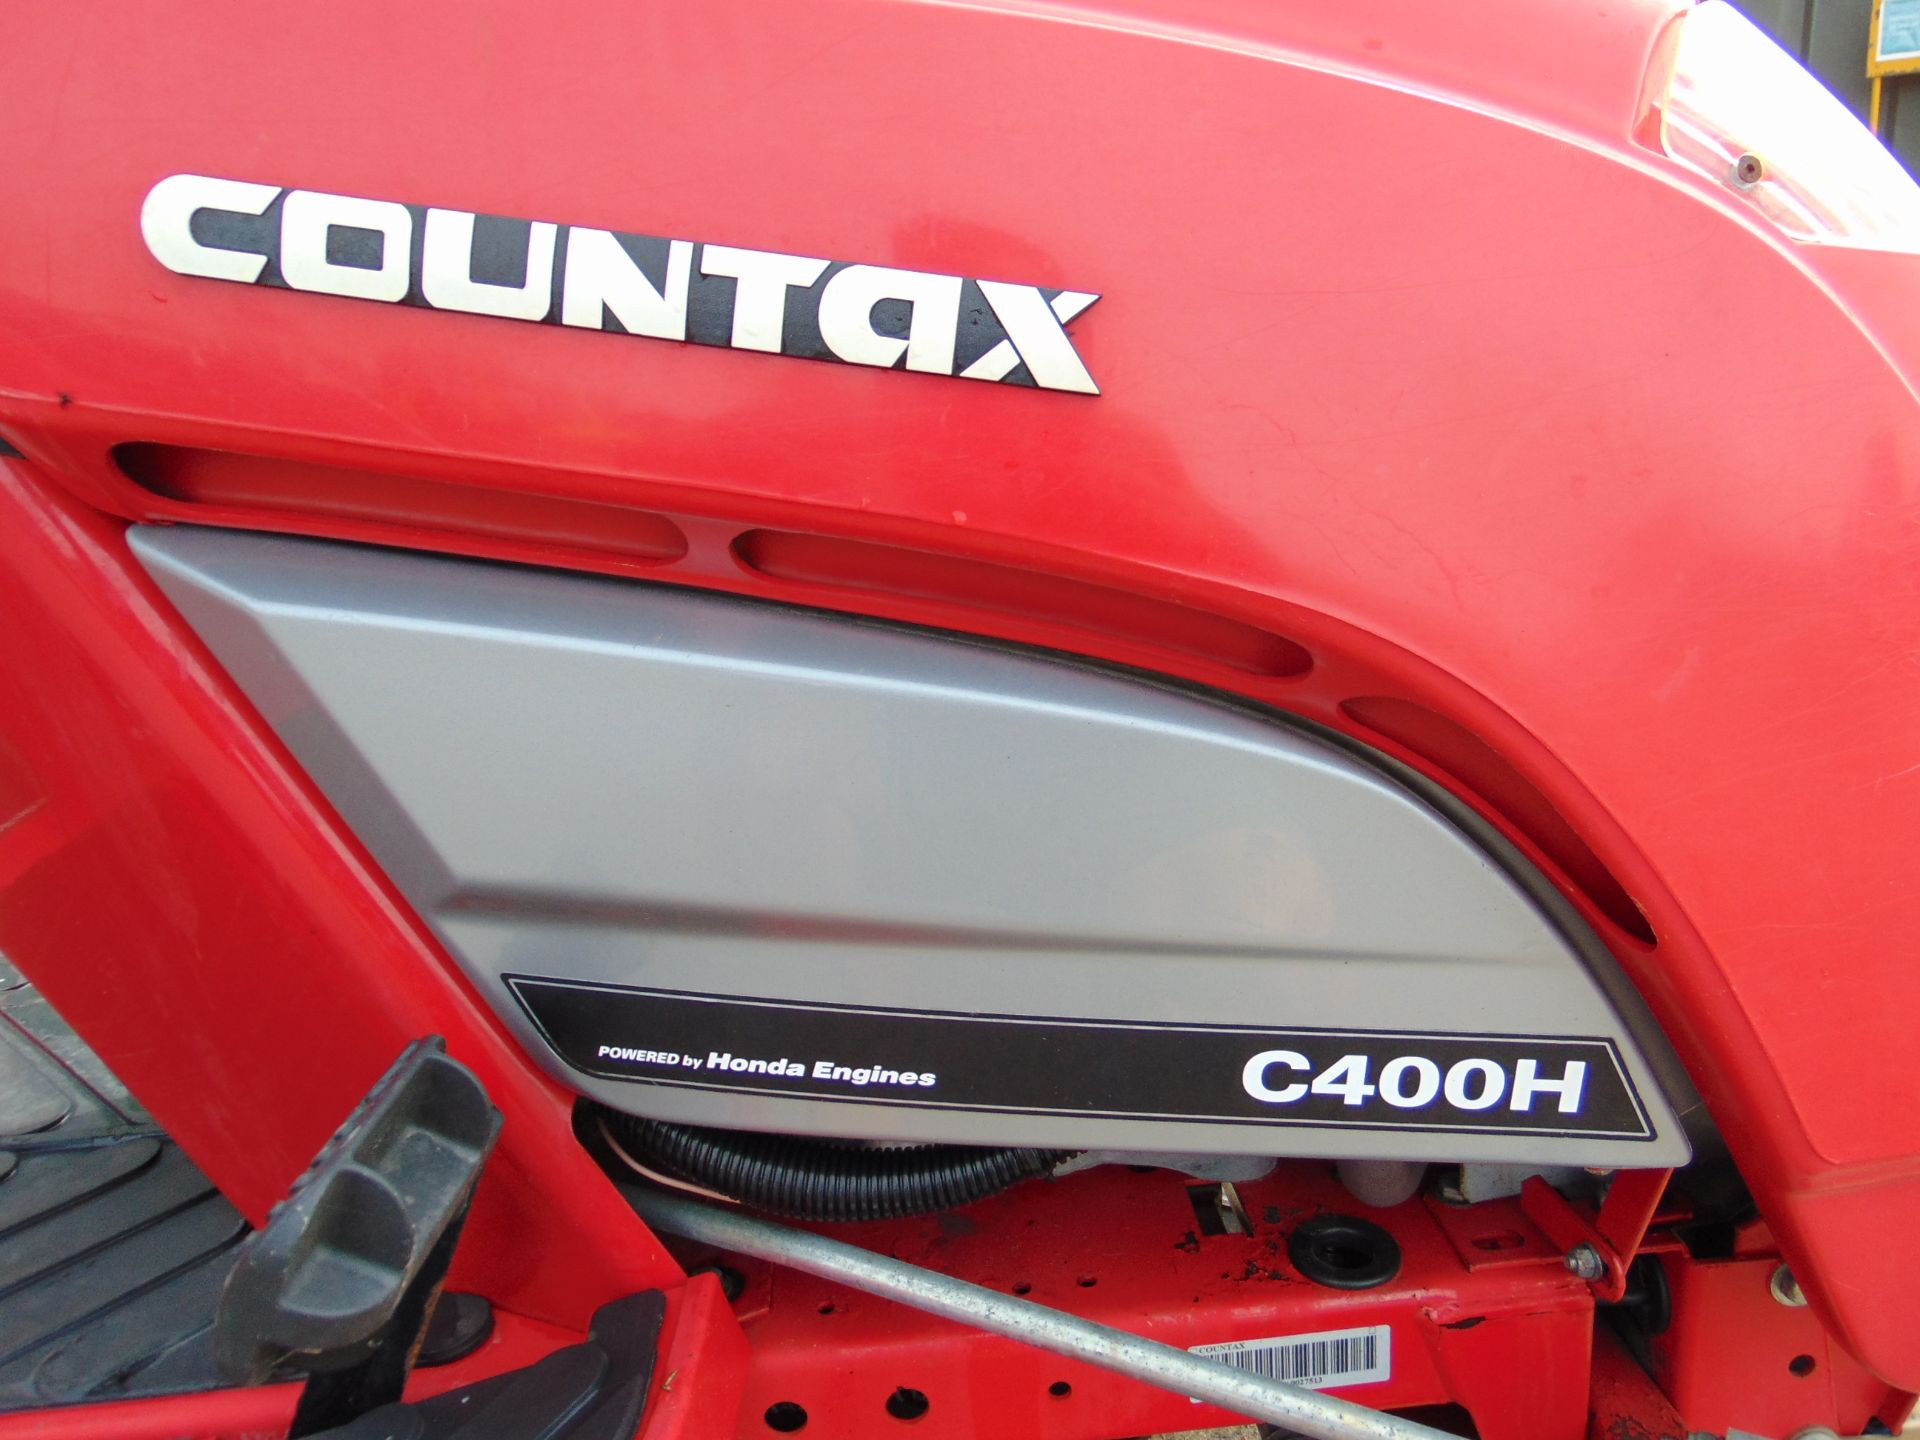 Countax C400H Ride On Mower / Lawn Tractor - Image 12 of 13